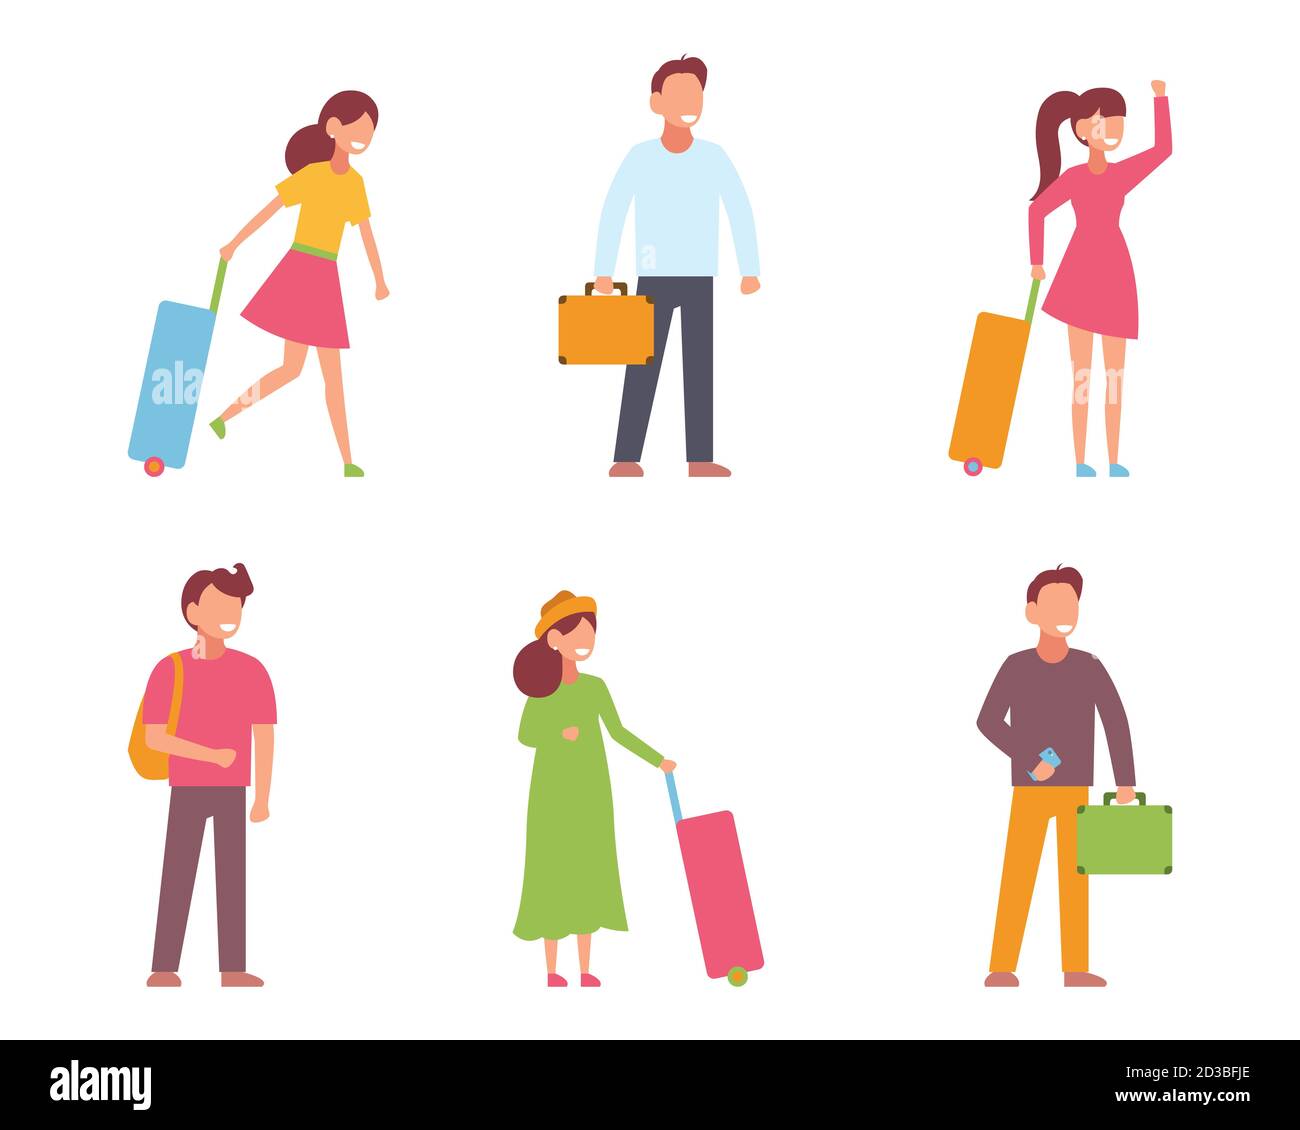 Traveling people, isometric icons with men and women in different poses and luggage, isolated vector illustration Stock Vector